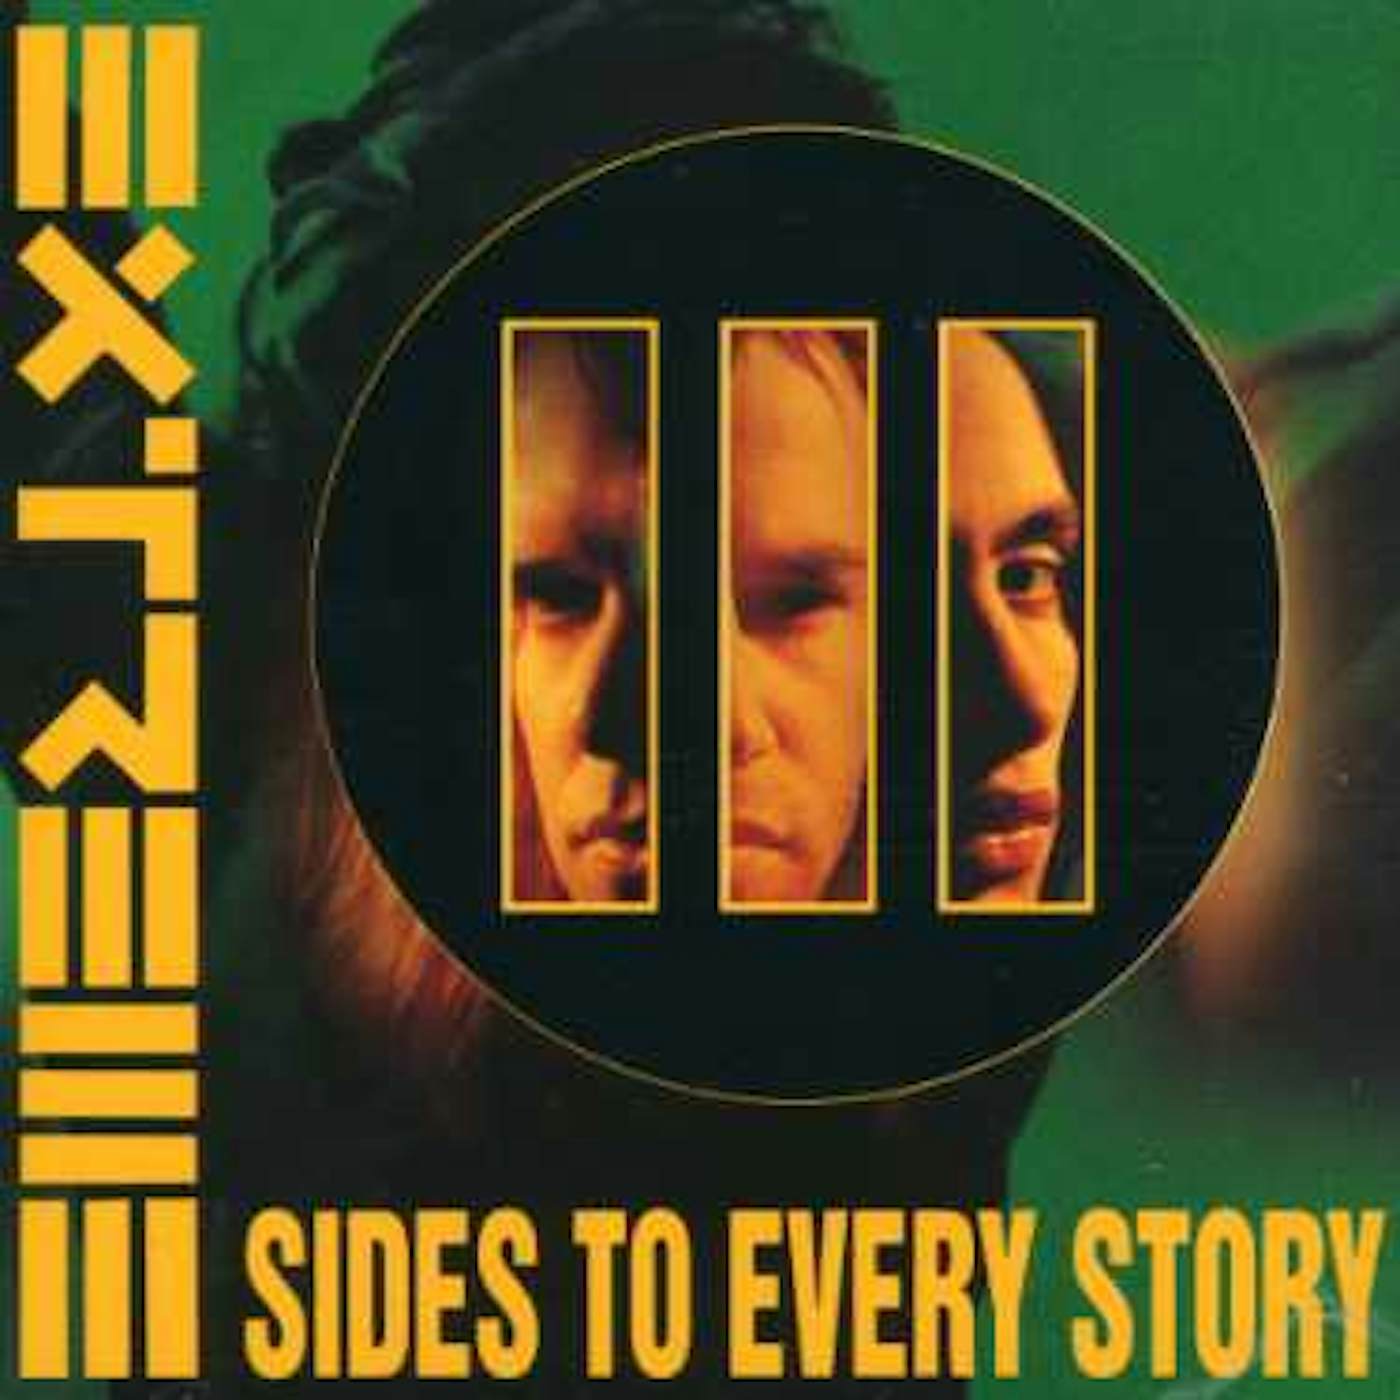 Extreme III SIDES TO EVERY STORY (JEWEL BOX) CD